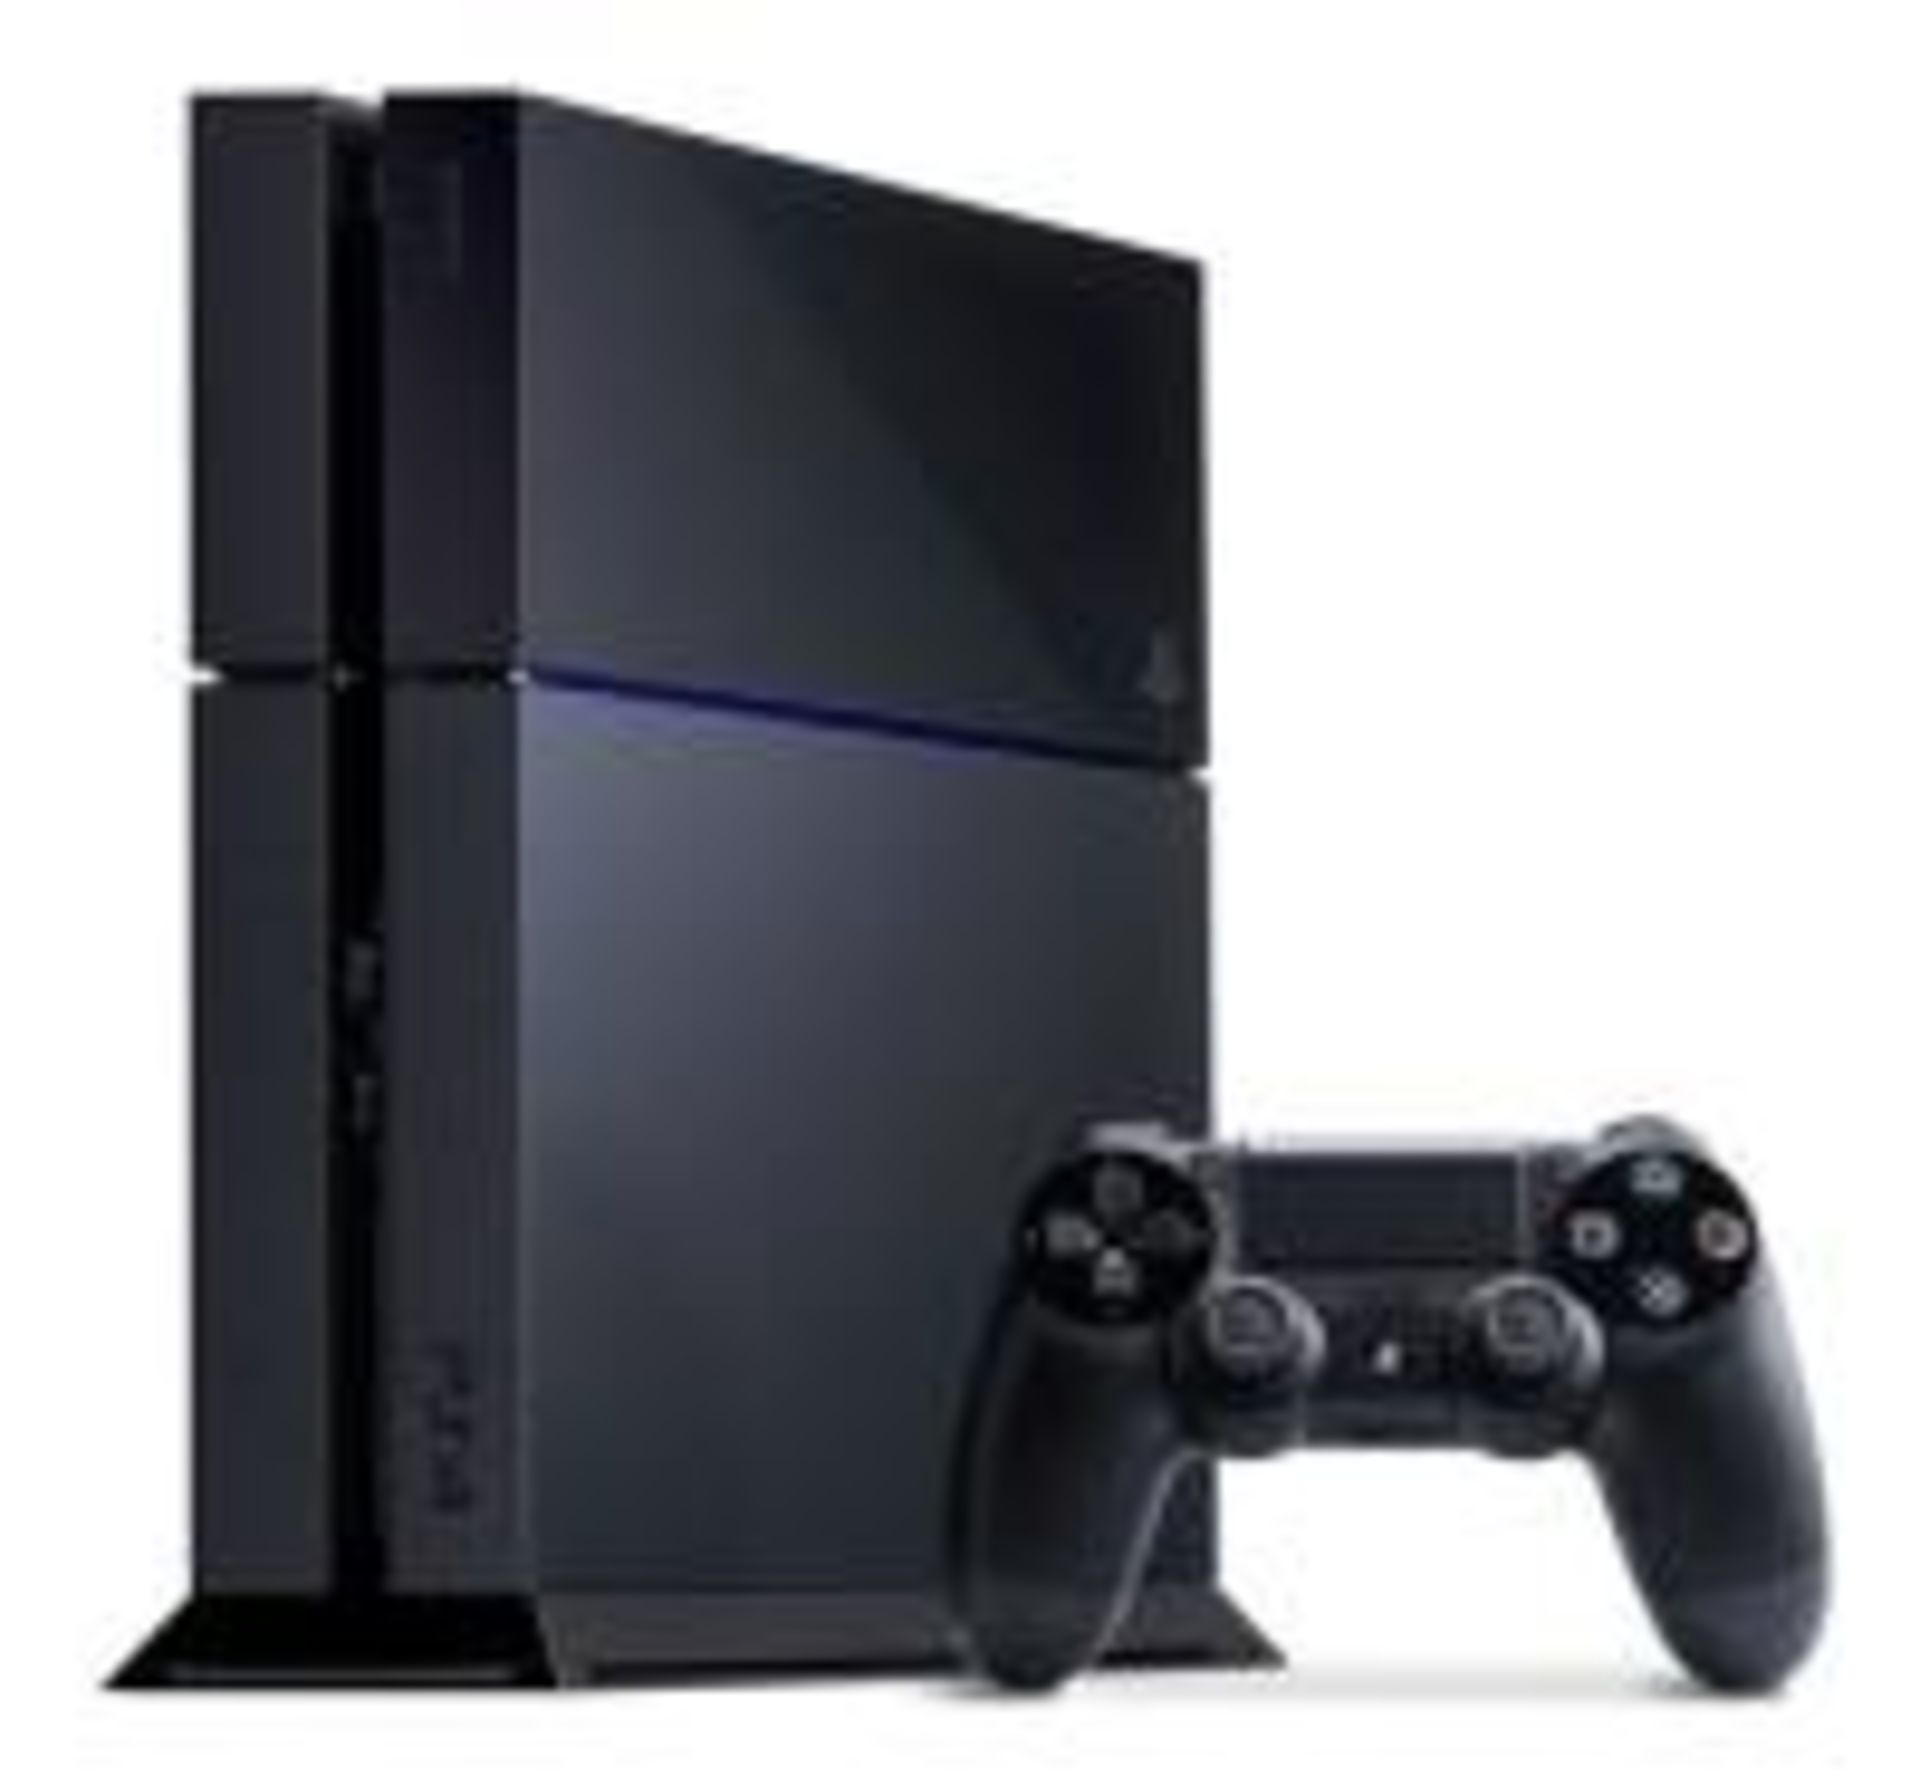 Sony PlayStation 4 - game consoles (Black) - FREE DELIVERY